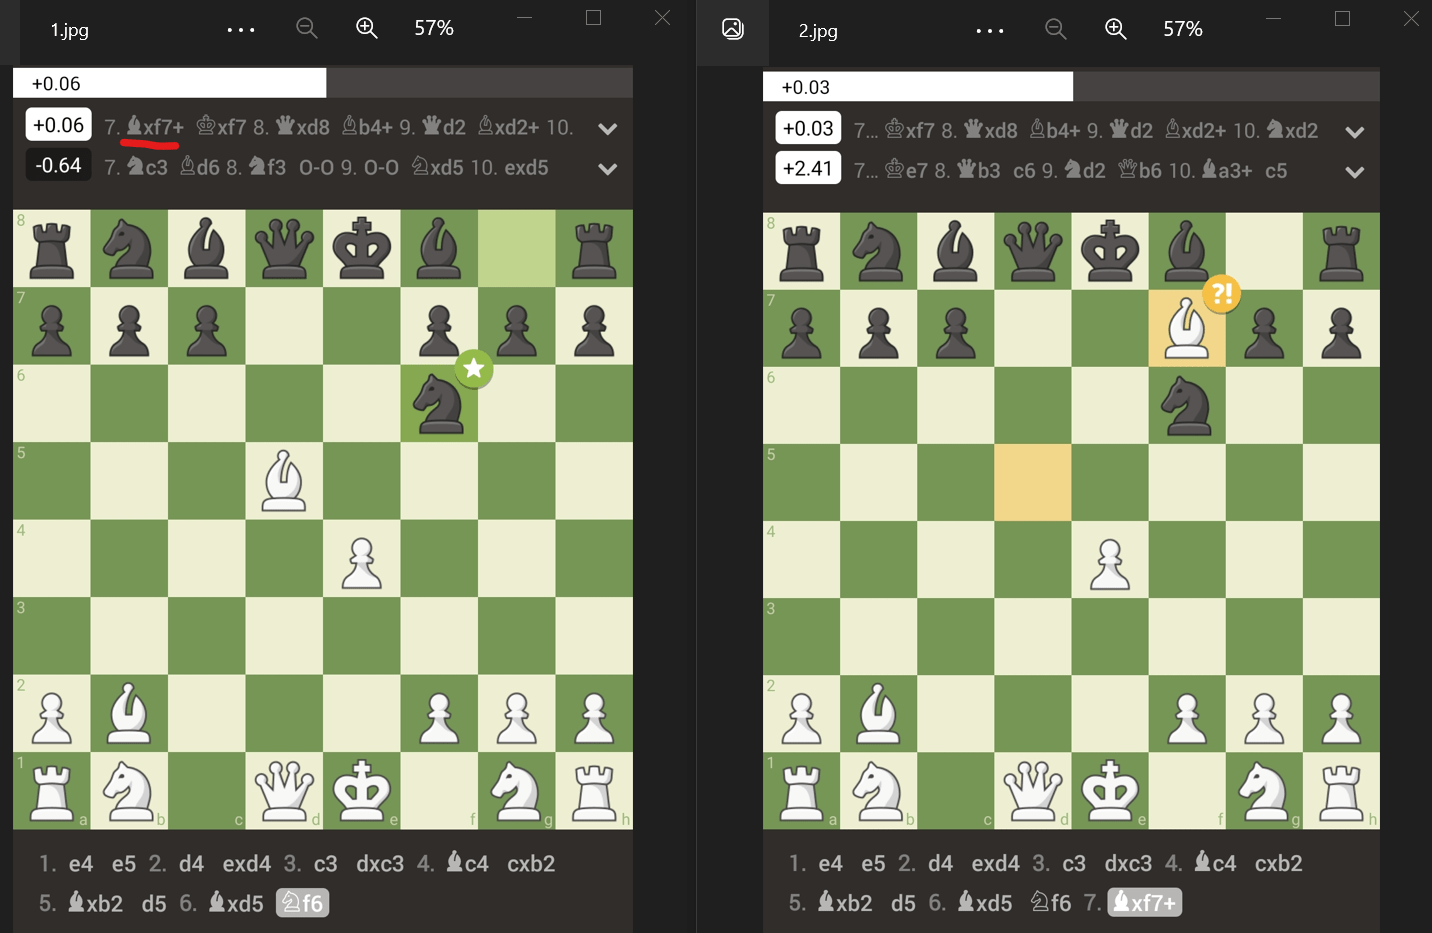 Bizarre chess engine suggestion in the opening